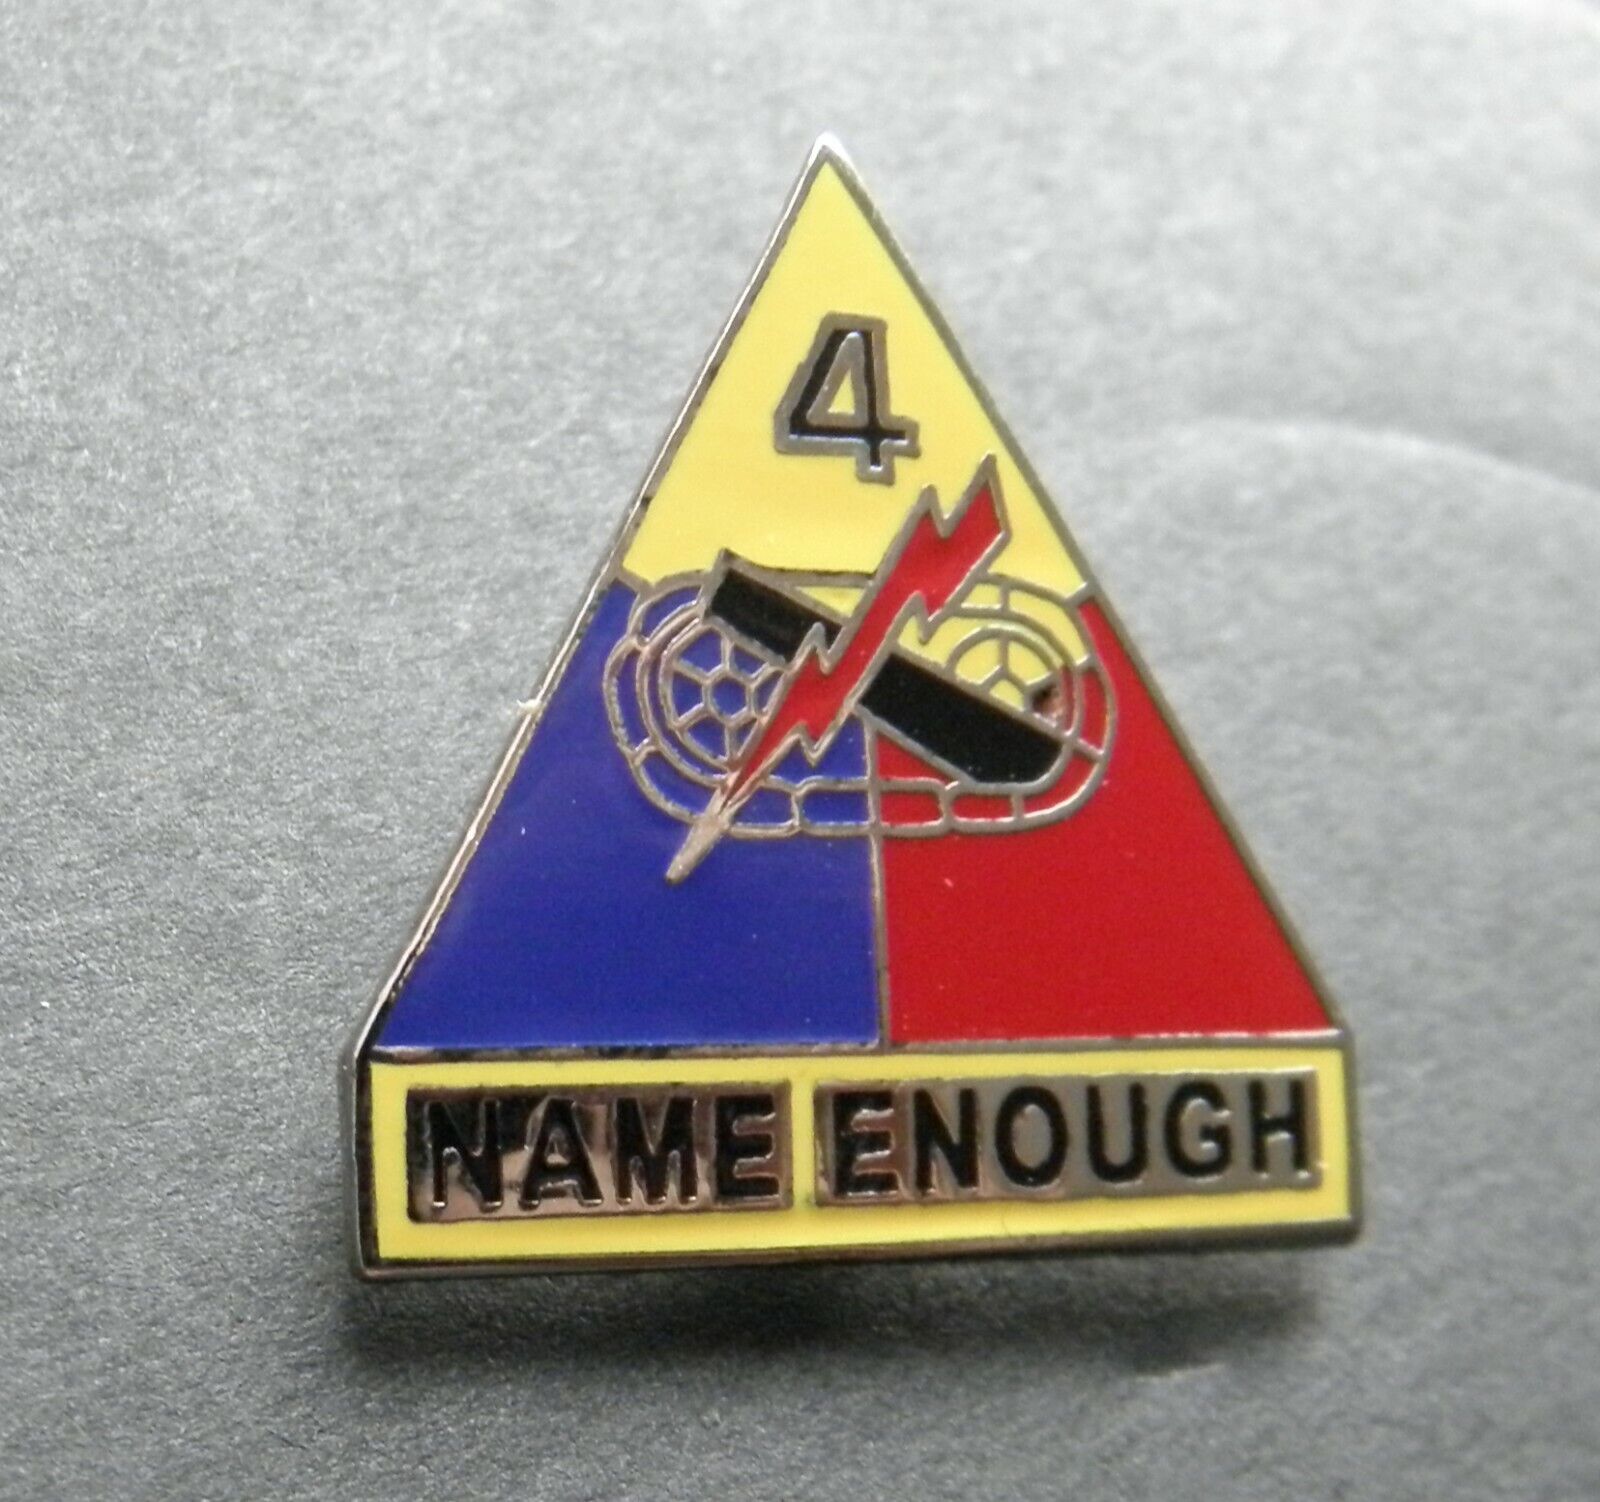 US ARMY NAME ENOUGH 4th ARMORED DIVISION LAPEL PIN BADGE 1 INCH